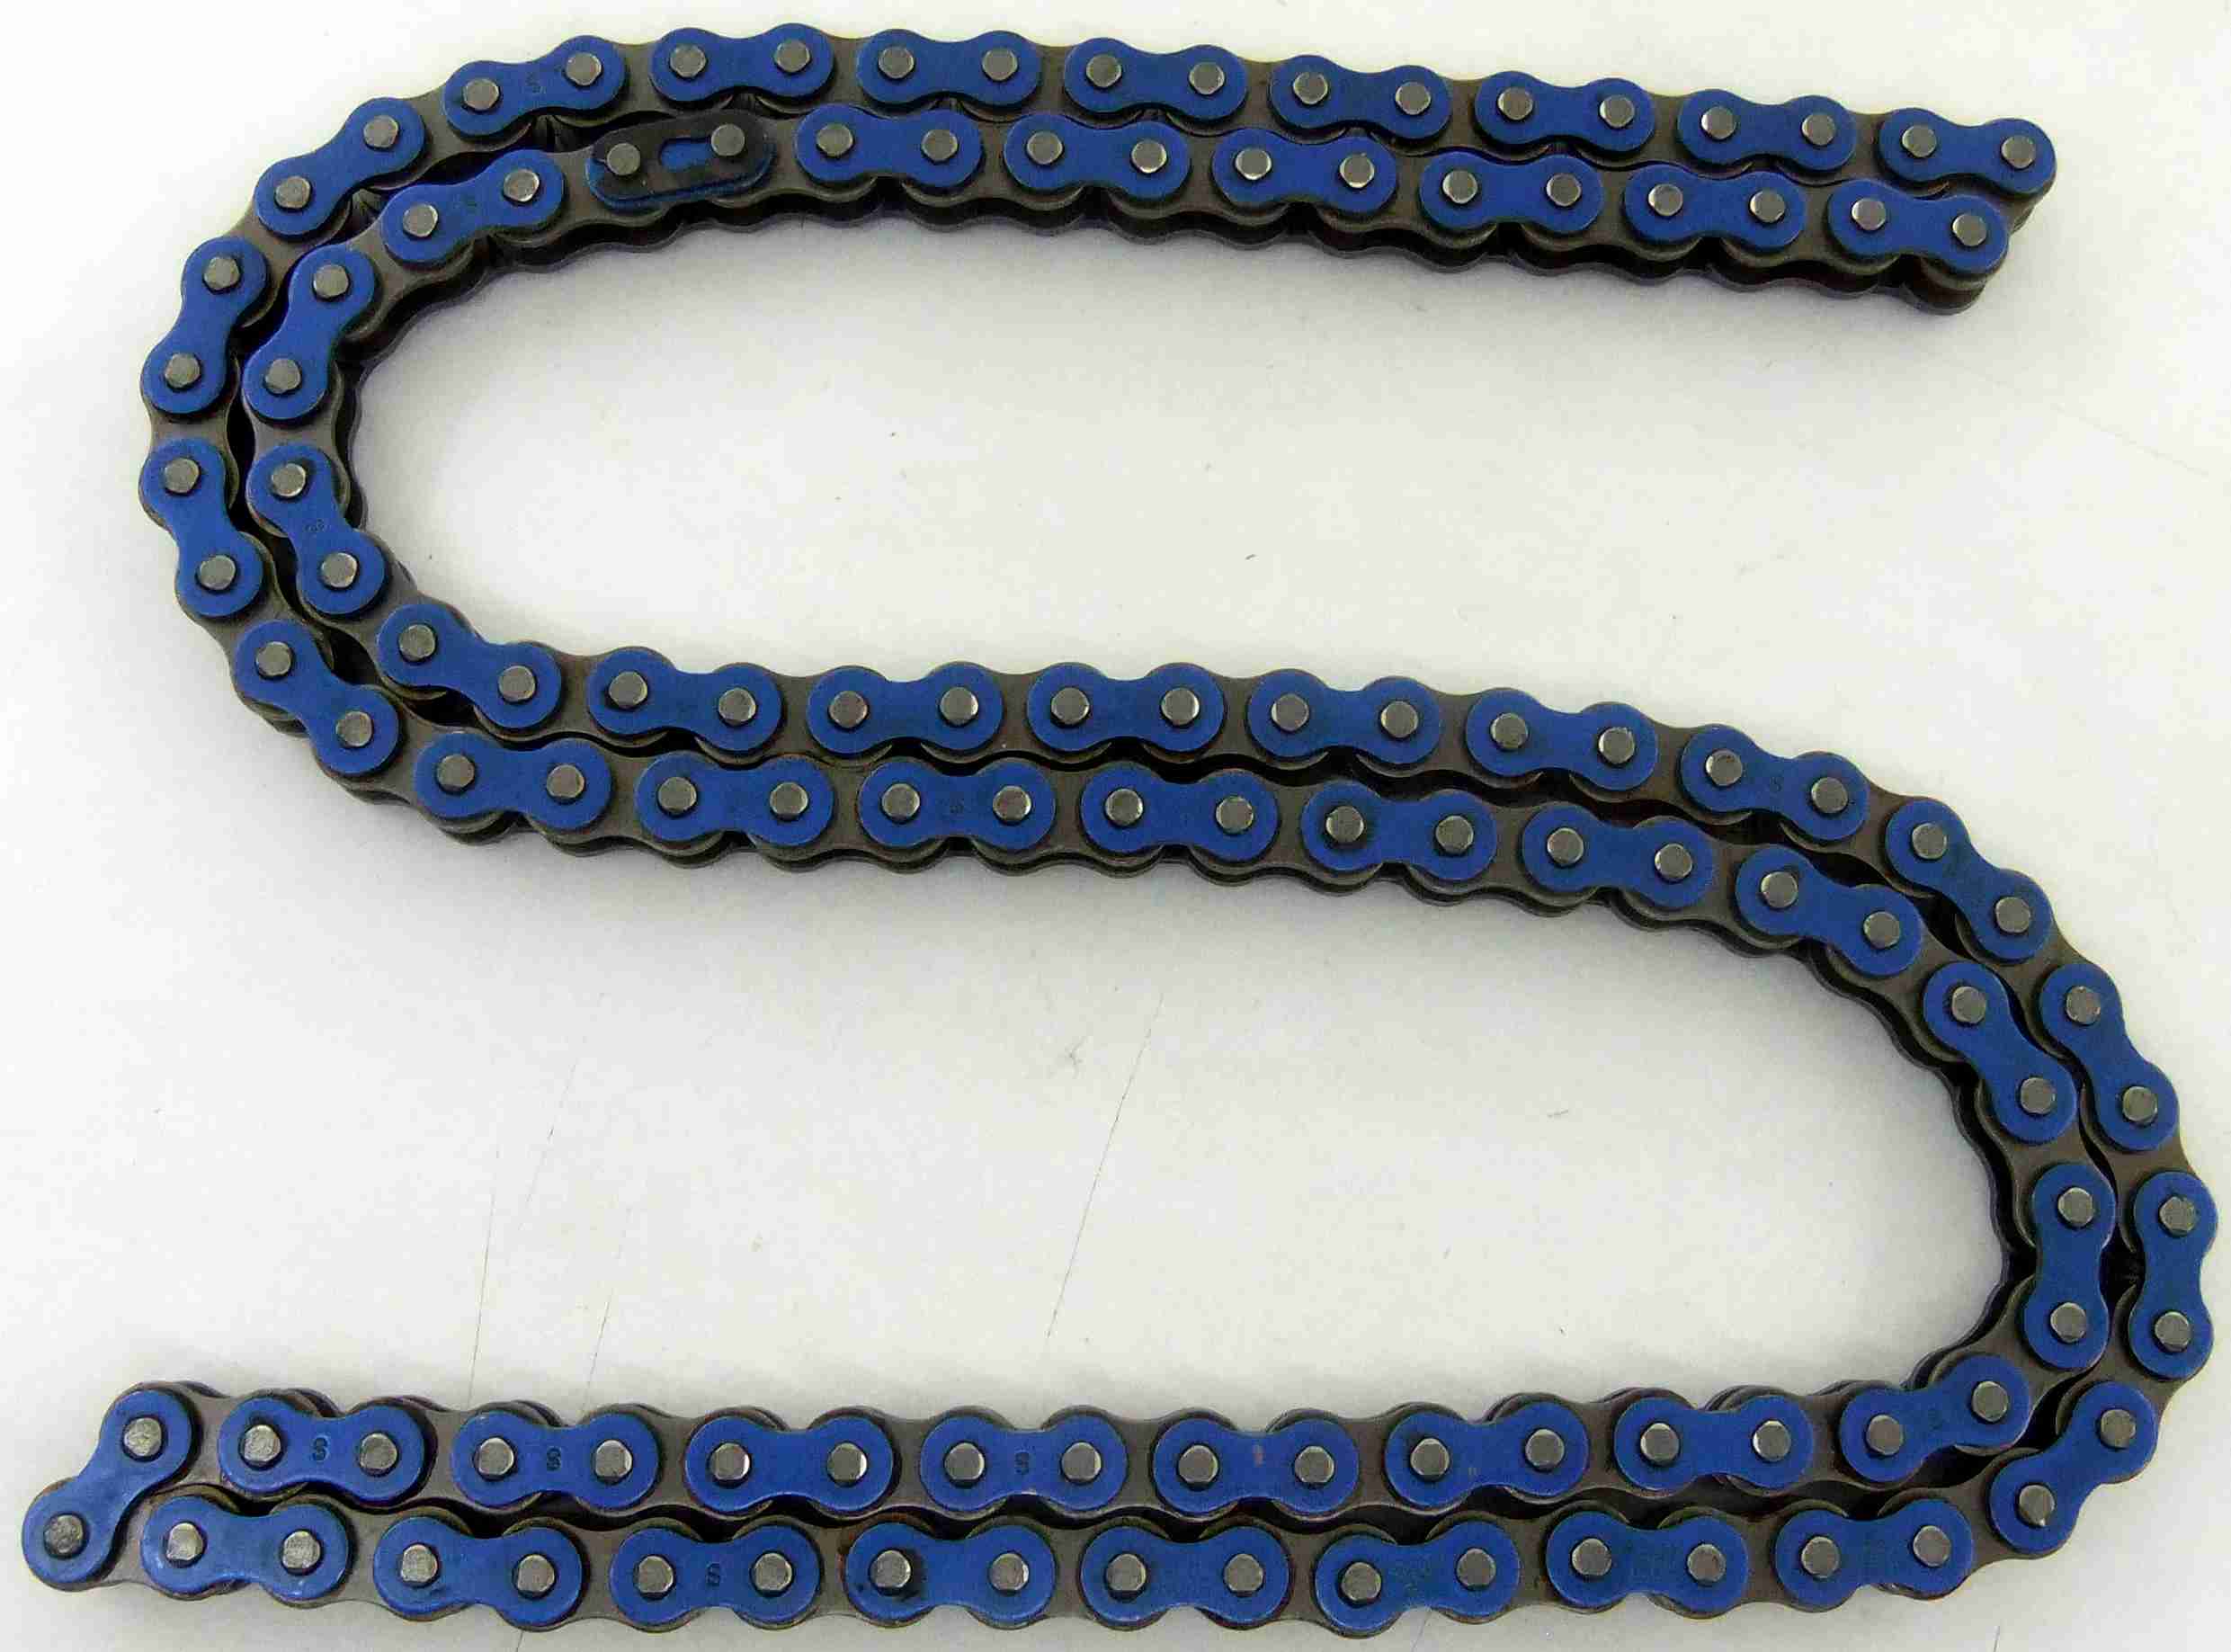 ENUMA CHAIN 530MVXZ2 Q-X-RING ULTRA-STRONG EXTRA-PREMIUM HIGH PERFORMANCE CHAIN 1 METER = 63 LINKS/ROLLING BLUE (REQUIRED QUANTITY  ROLLS OF ORDER FROM 50-630)